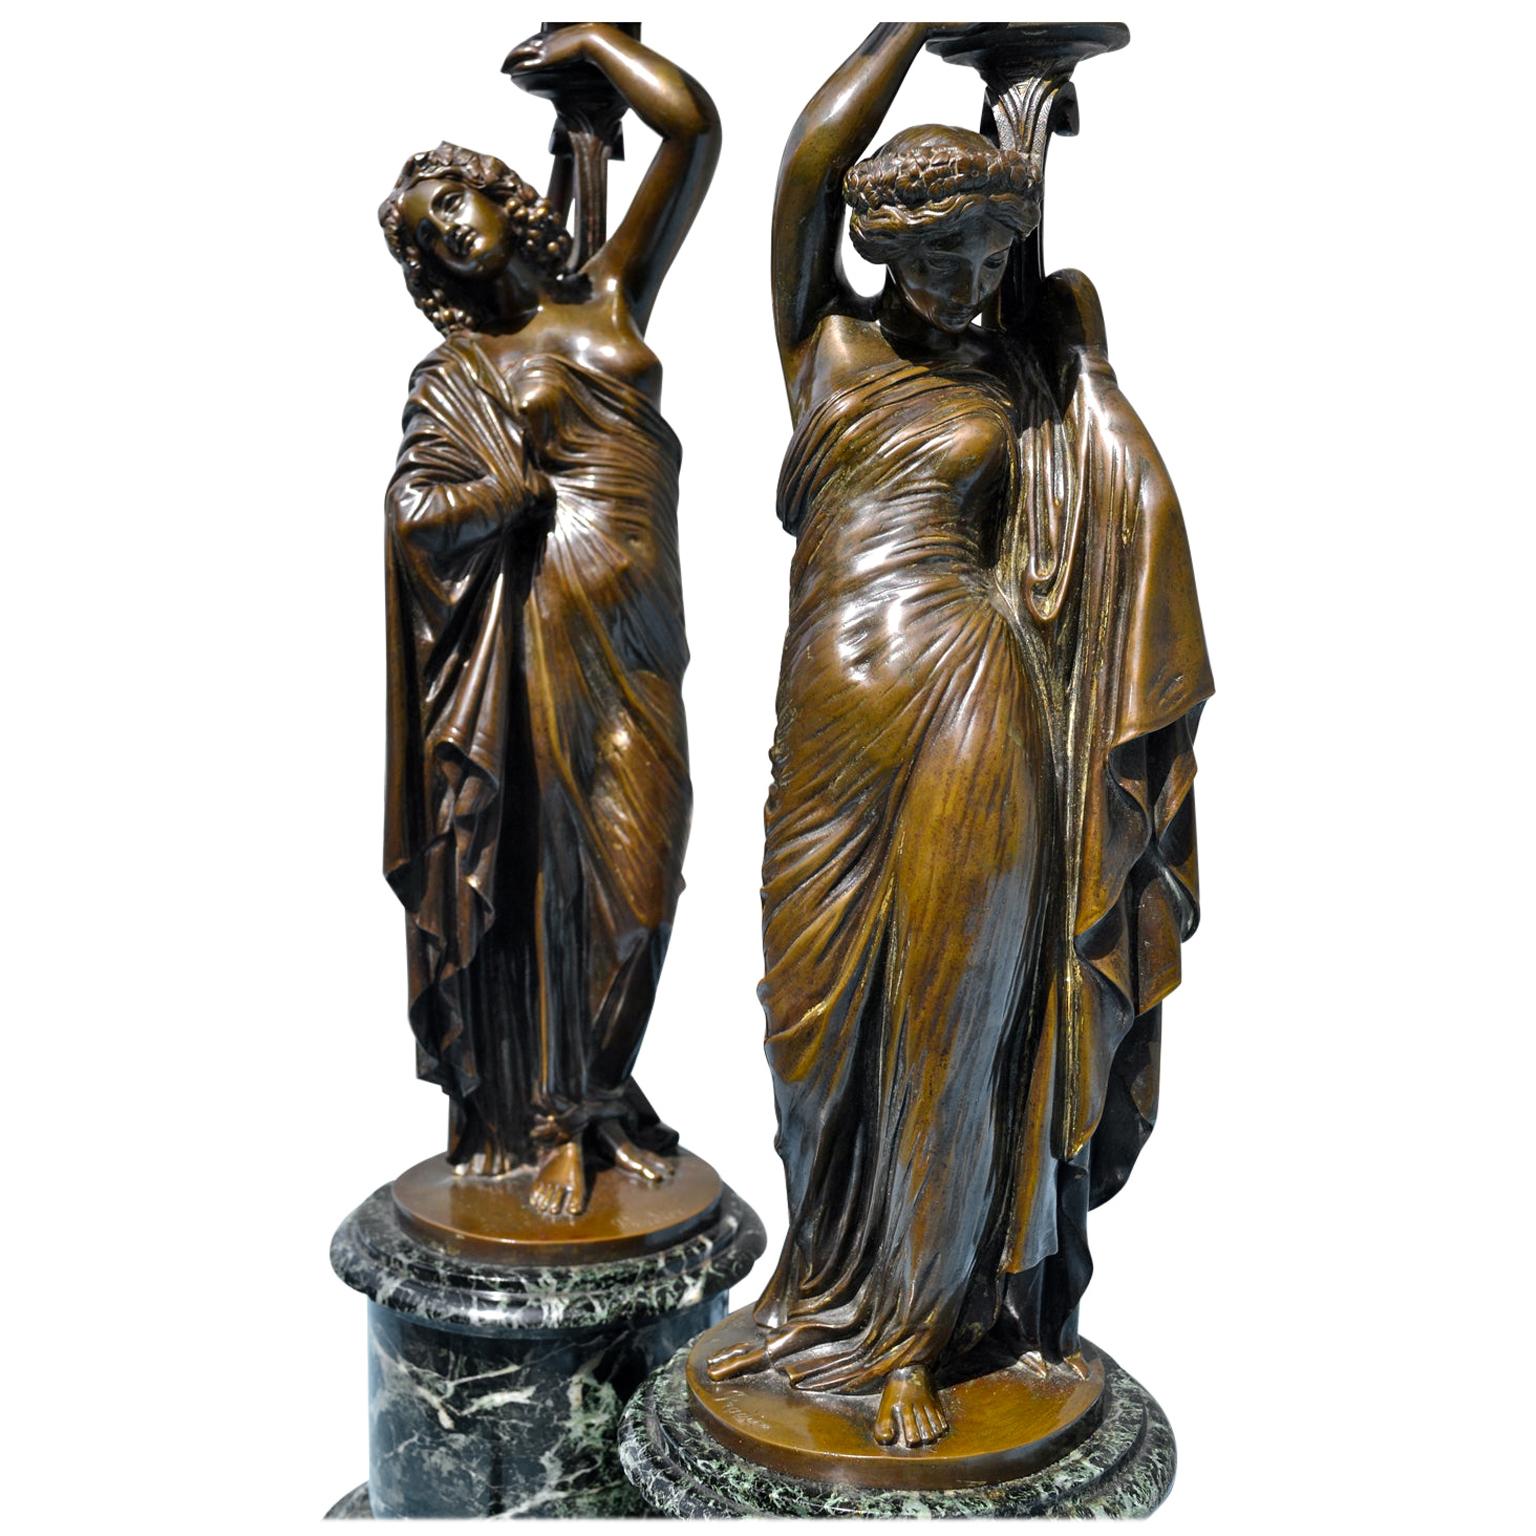 A beautifully cast pair of French 19th century neoclassical patinated figural bronze nine arm candelabra after a model by Jaen Jacques Pradier They are signed J. Pradier and were converted into lamps in the 20th century. Each candelabra is cast as